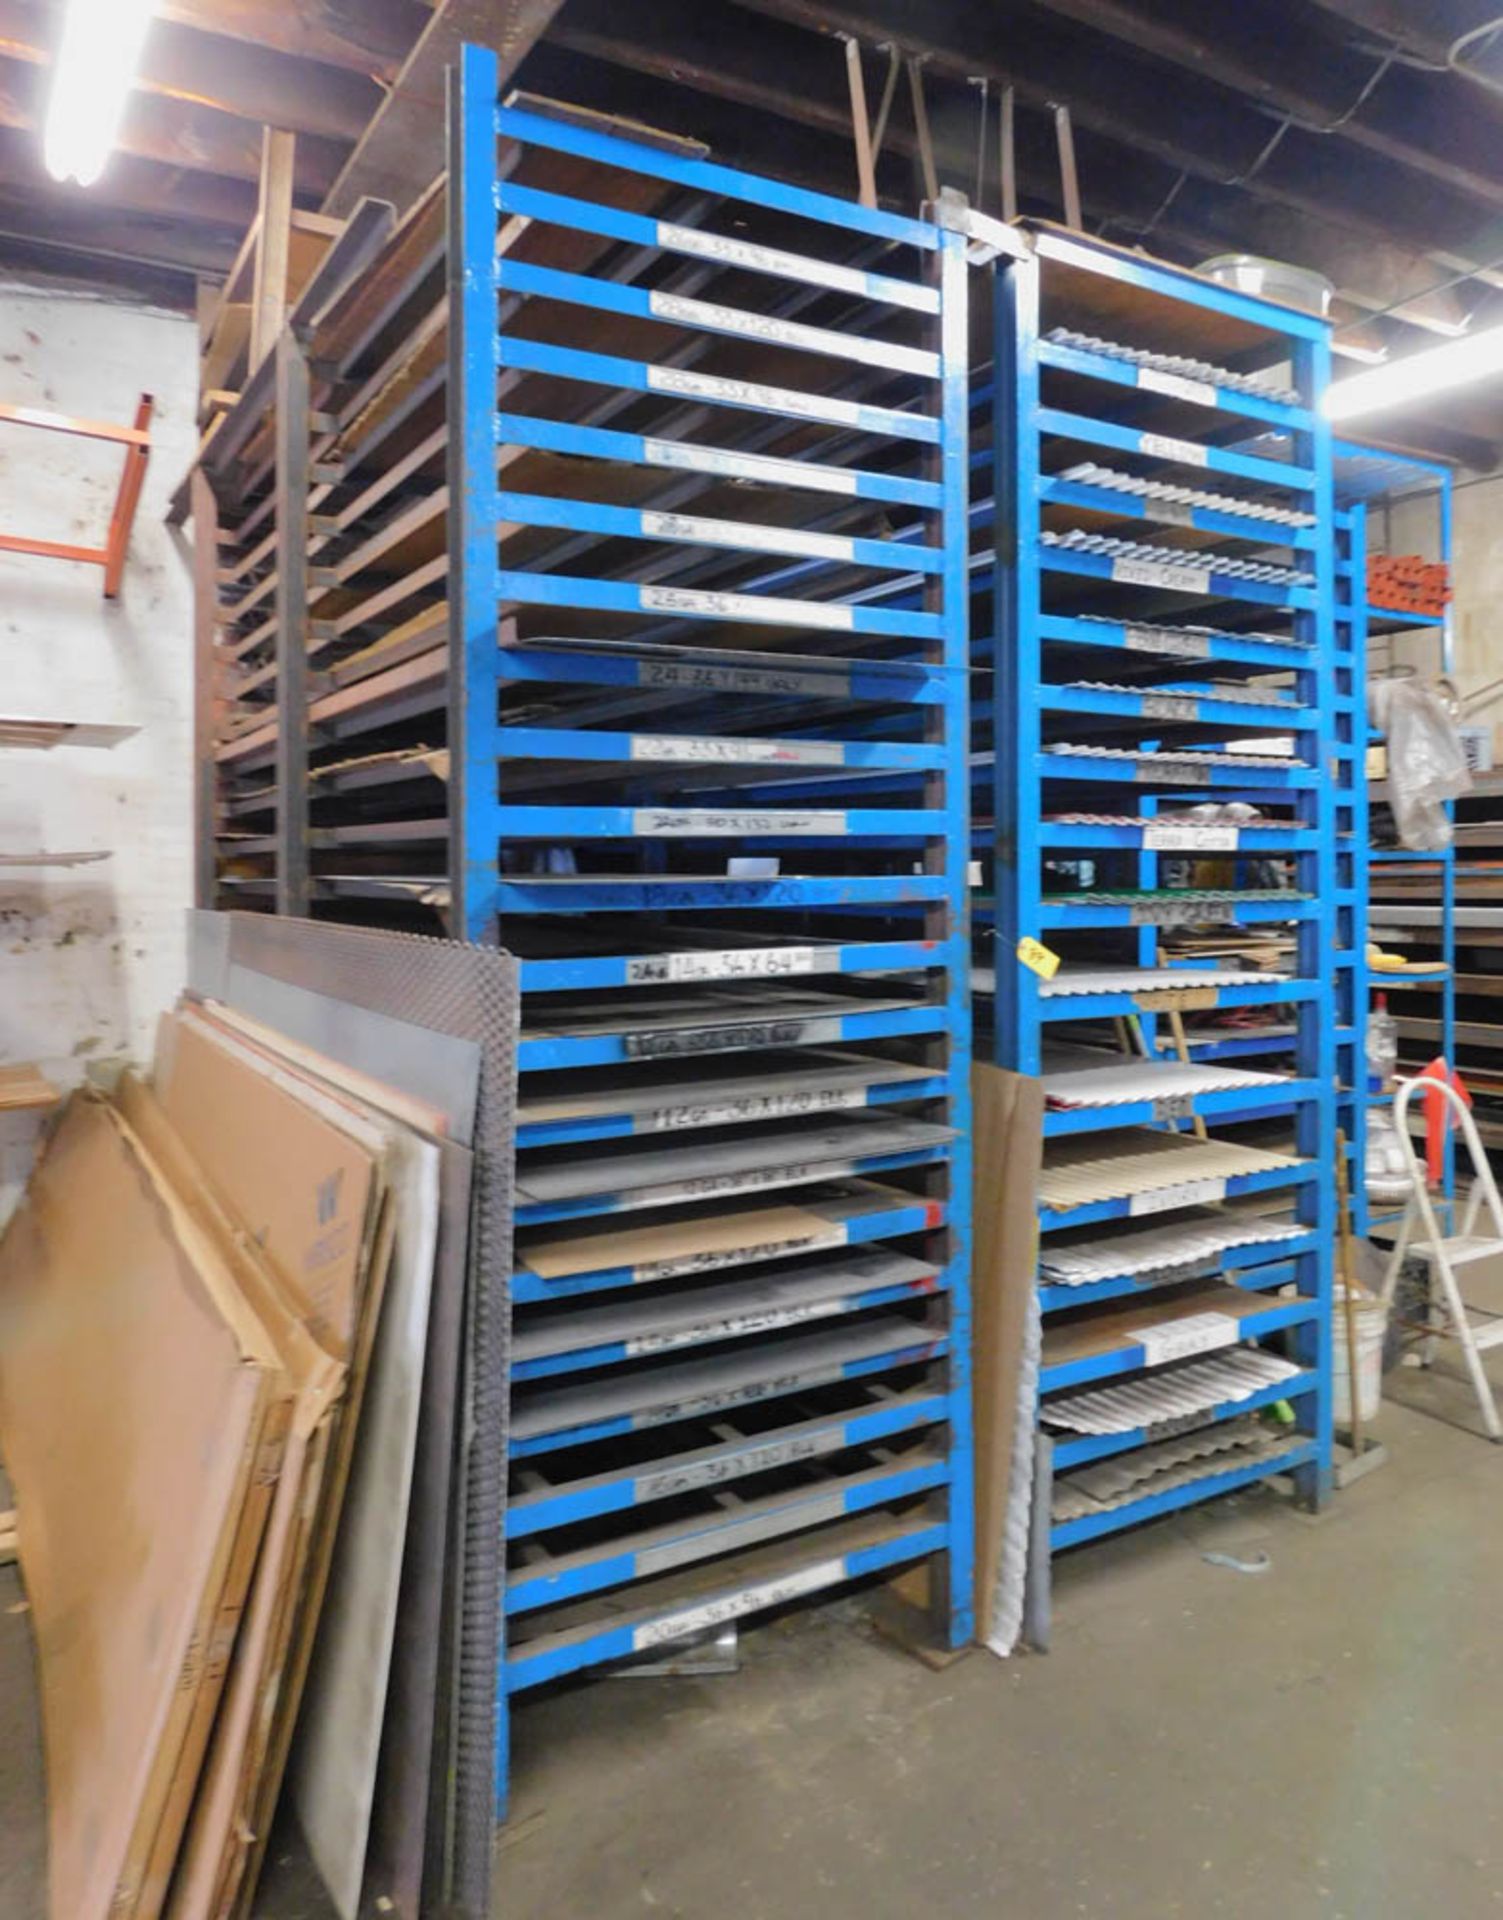 (2) SECTIONS OF RACKING WITH CONTENTS